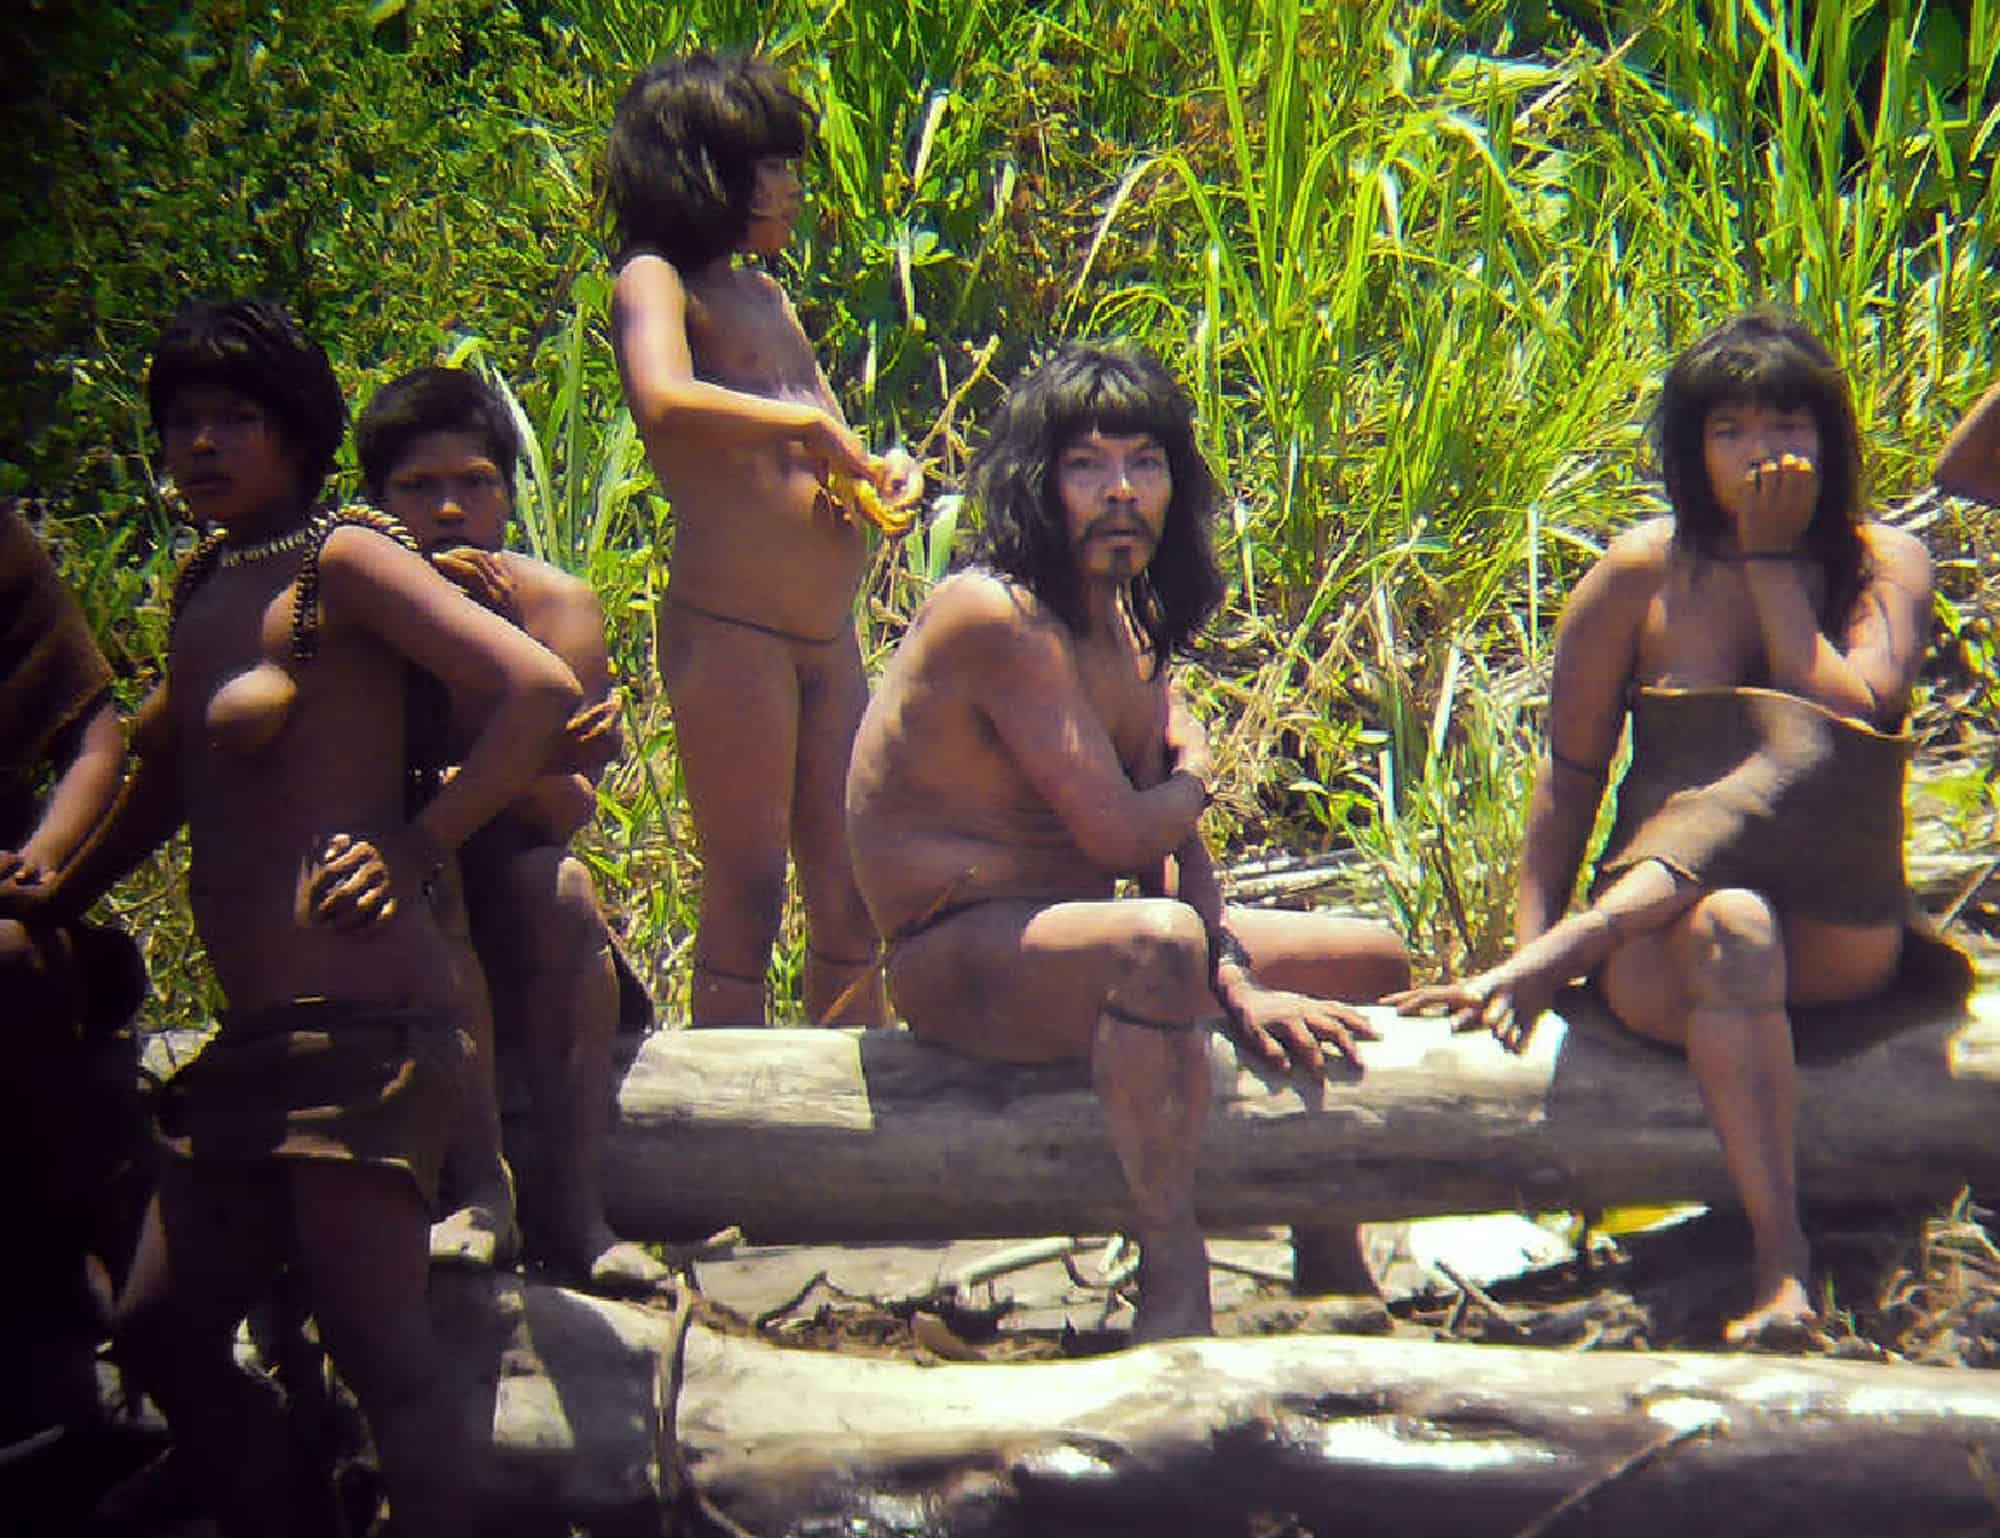 A family of the Mashco-Piro tribe somewhere in the southeastern Peruvian jungle.